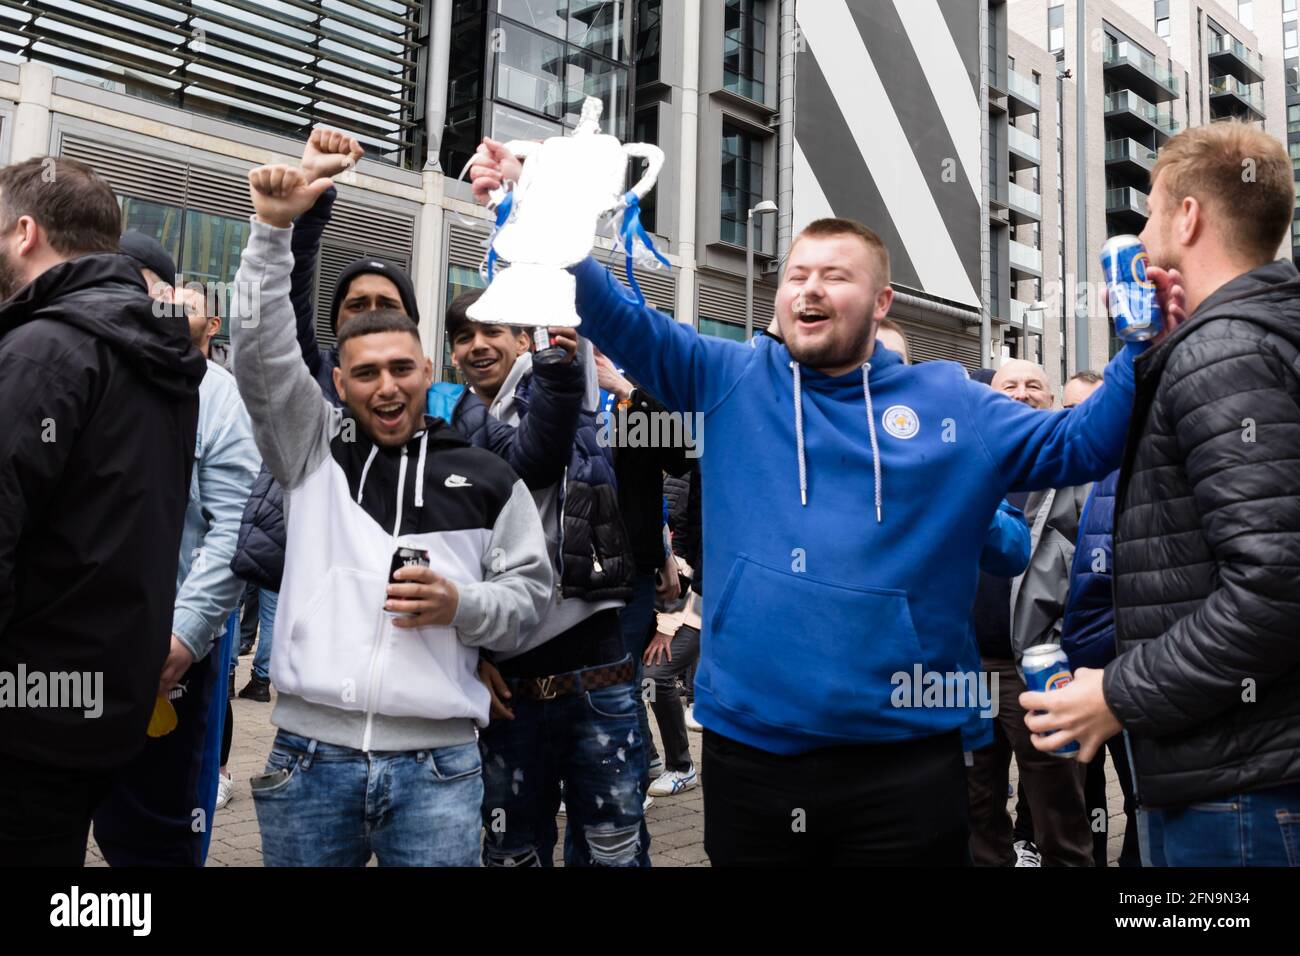 Wembley Stadium, Wembley Park, UK. 15th May, 2021. Leicester City supporters having fun pre match at Wembley ahead of the FA Cup Final 2021 against Chelsea at Wembley Stadium. Credit: amanda rose/Alamy Live News Stock Photo